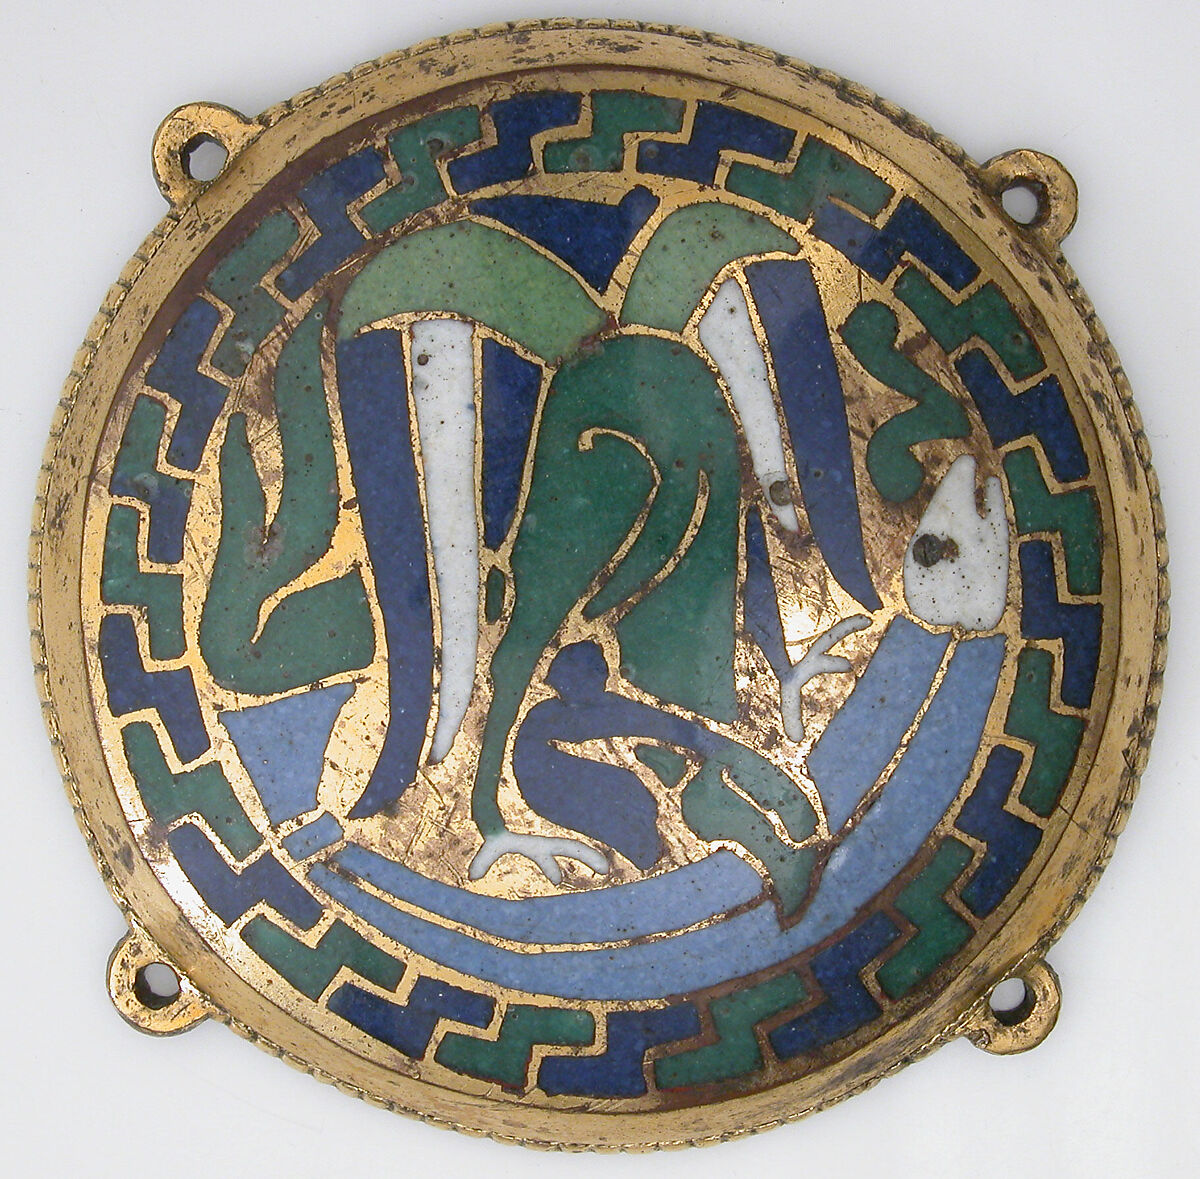 Eagle Attacking a Fish (one of five medallions from a coffret), Copper-gilt, champlevé enamel, French 